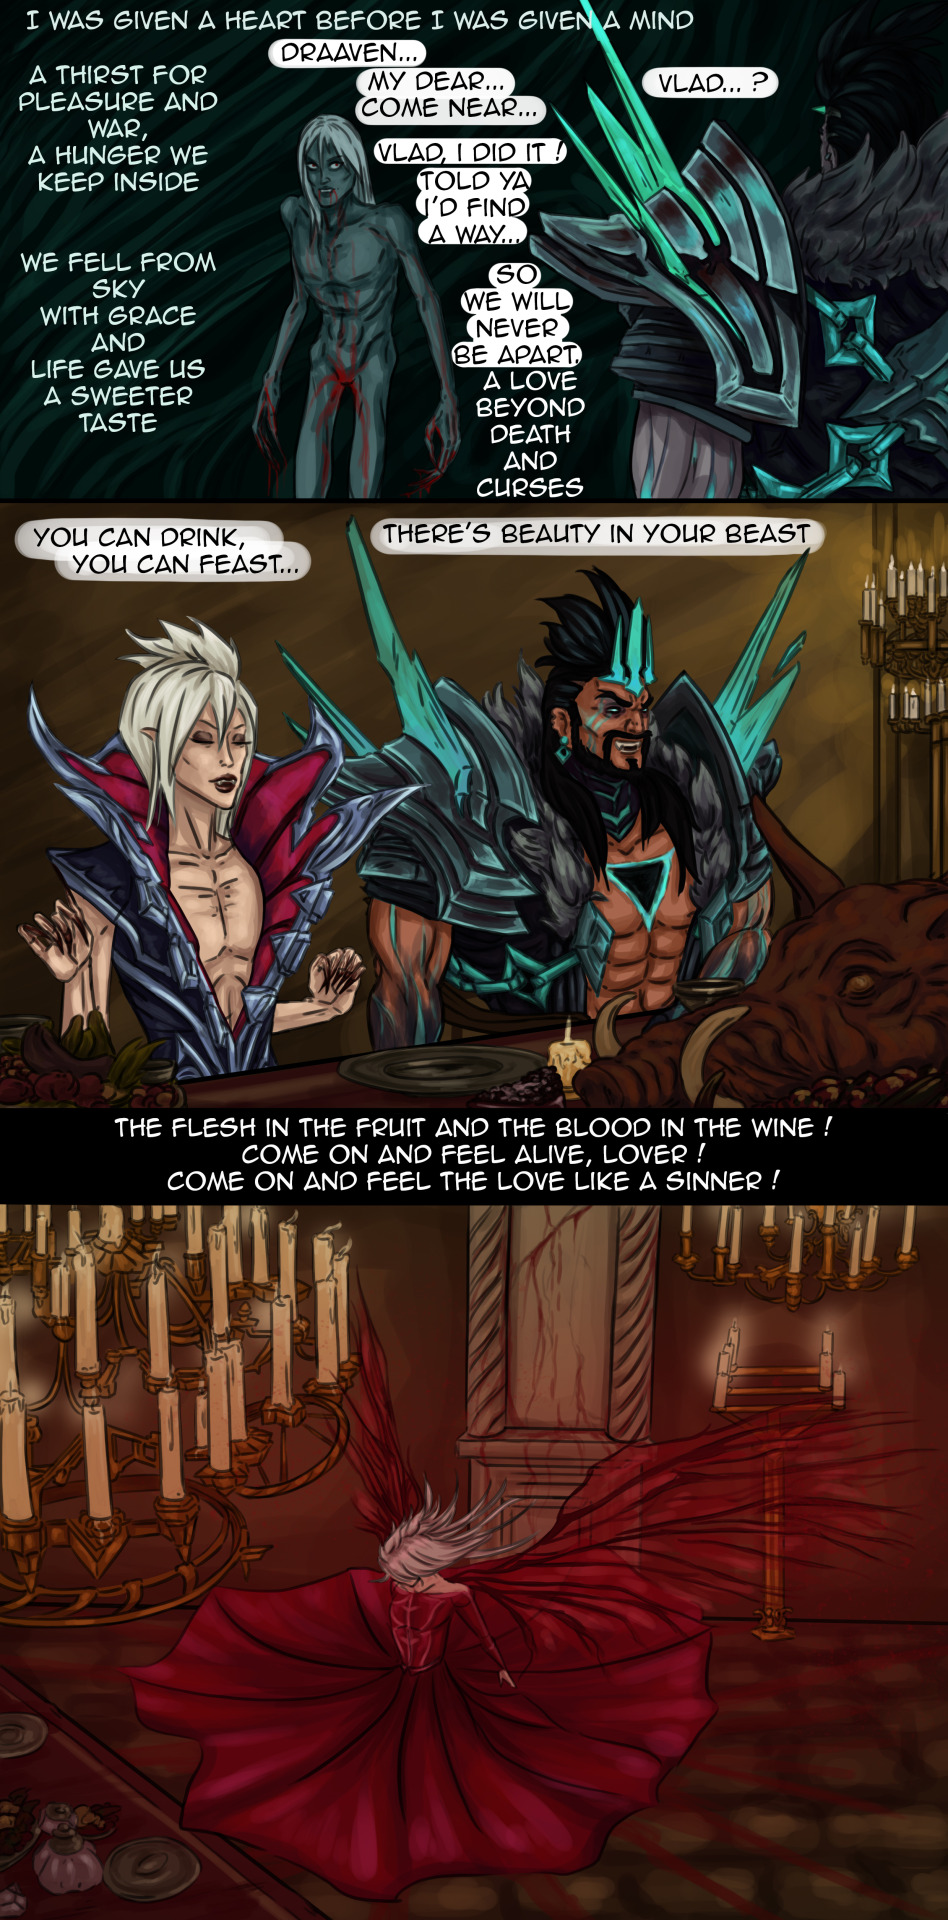 There’s Beauty in your Beast - Training doodles -

AU with Draven becoming a corrupted version of himself, sacrificing his humanity to be immortal and stay with Vladimir forever basically
MUSIC : Blood in the Wine by AURORA #League of Legends #draven#ruined draven#draven lol #draven league of legends #dravimir #draven x vladimir  #LoL League of Legends  #vladimir league of legends #vladimir lol#lol fanart #league of fanart  #league of legends fanart #league art#comics#art#nightbringer vladimir